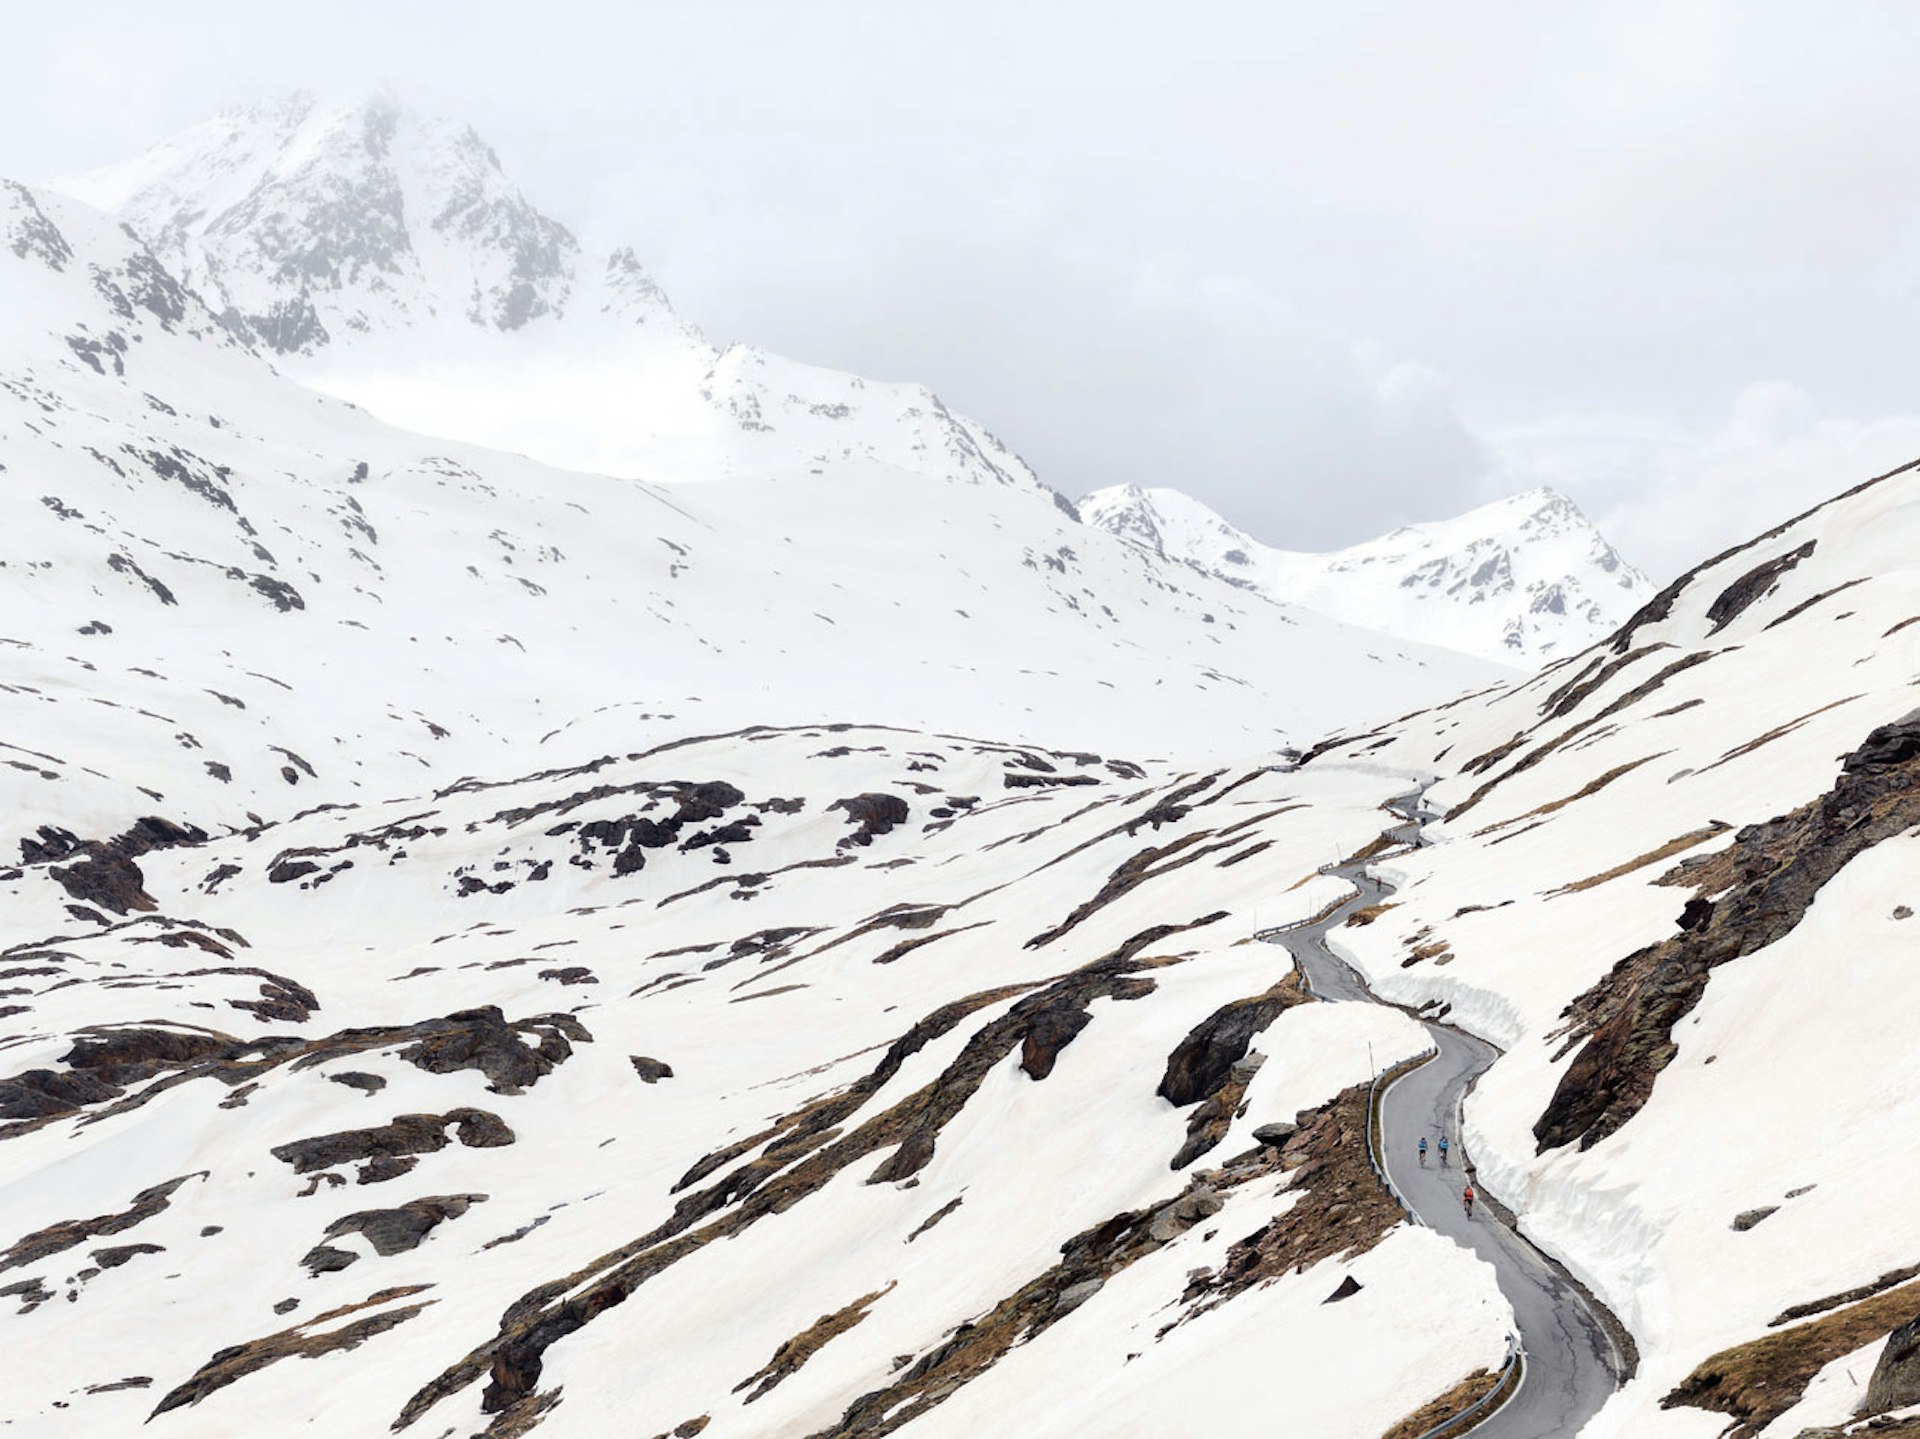 Gavia Pass, its slopes covered in snow